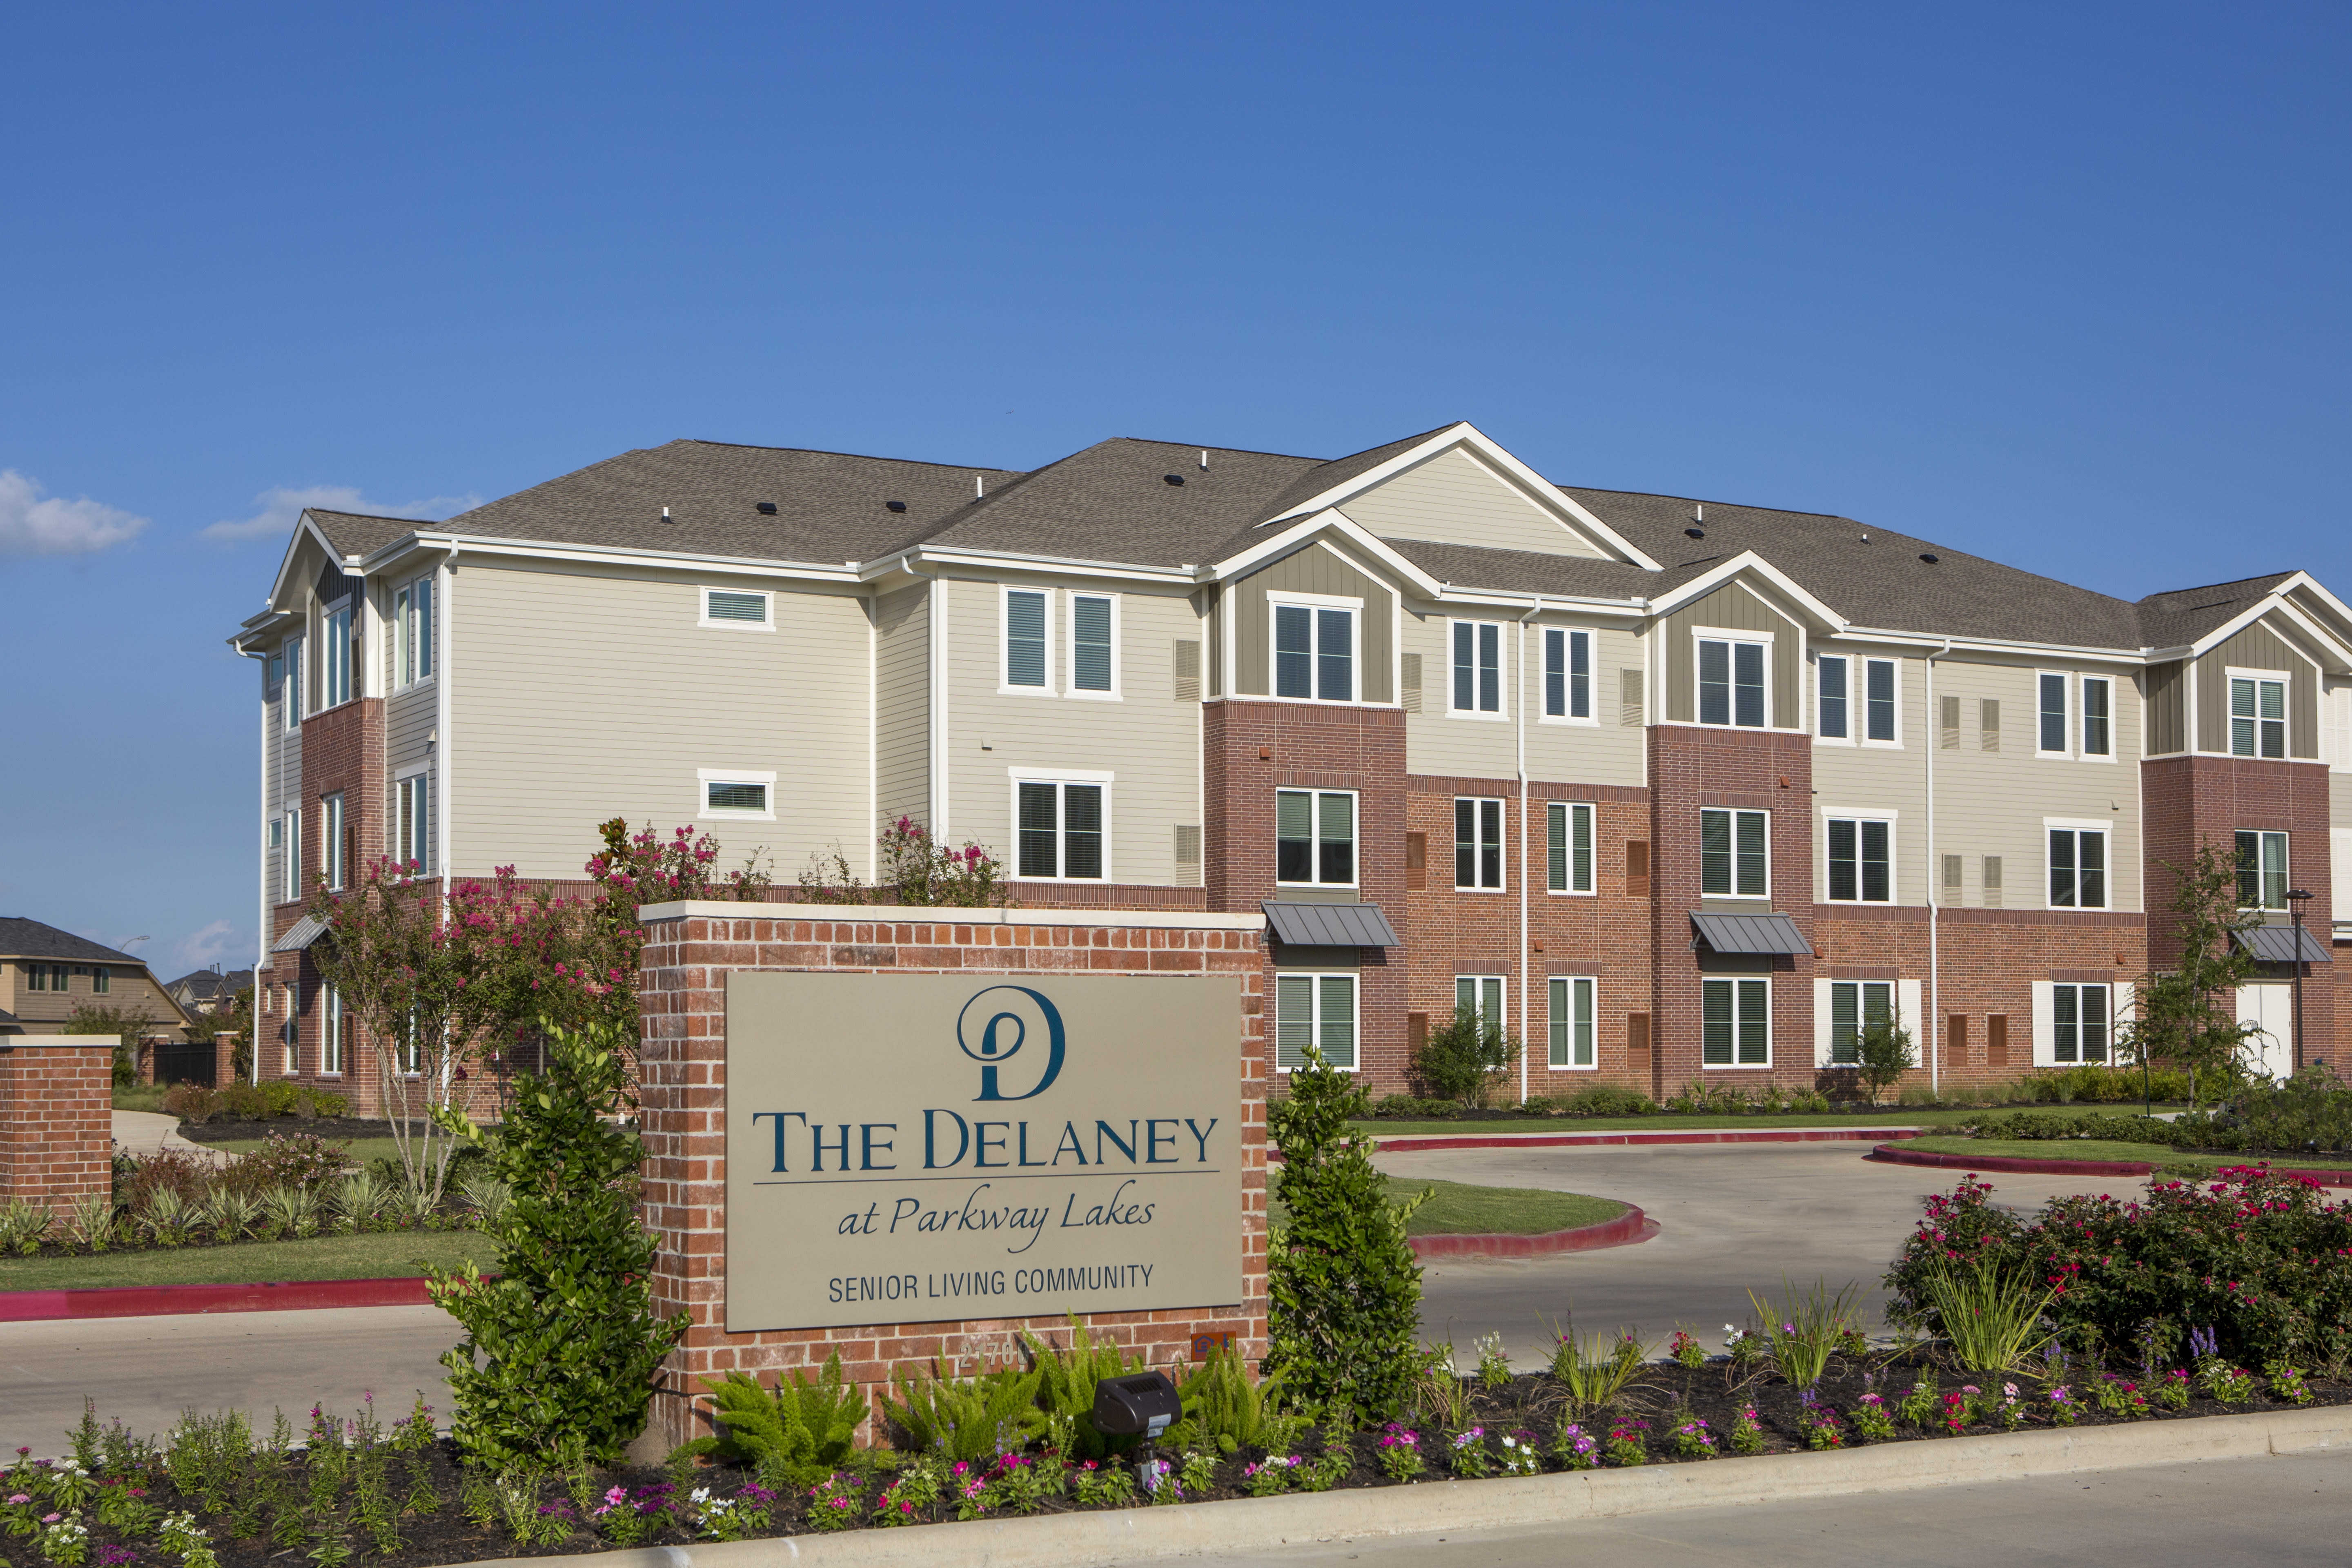 The Delaney at Parkway Lakes community exterior